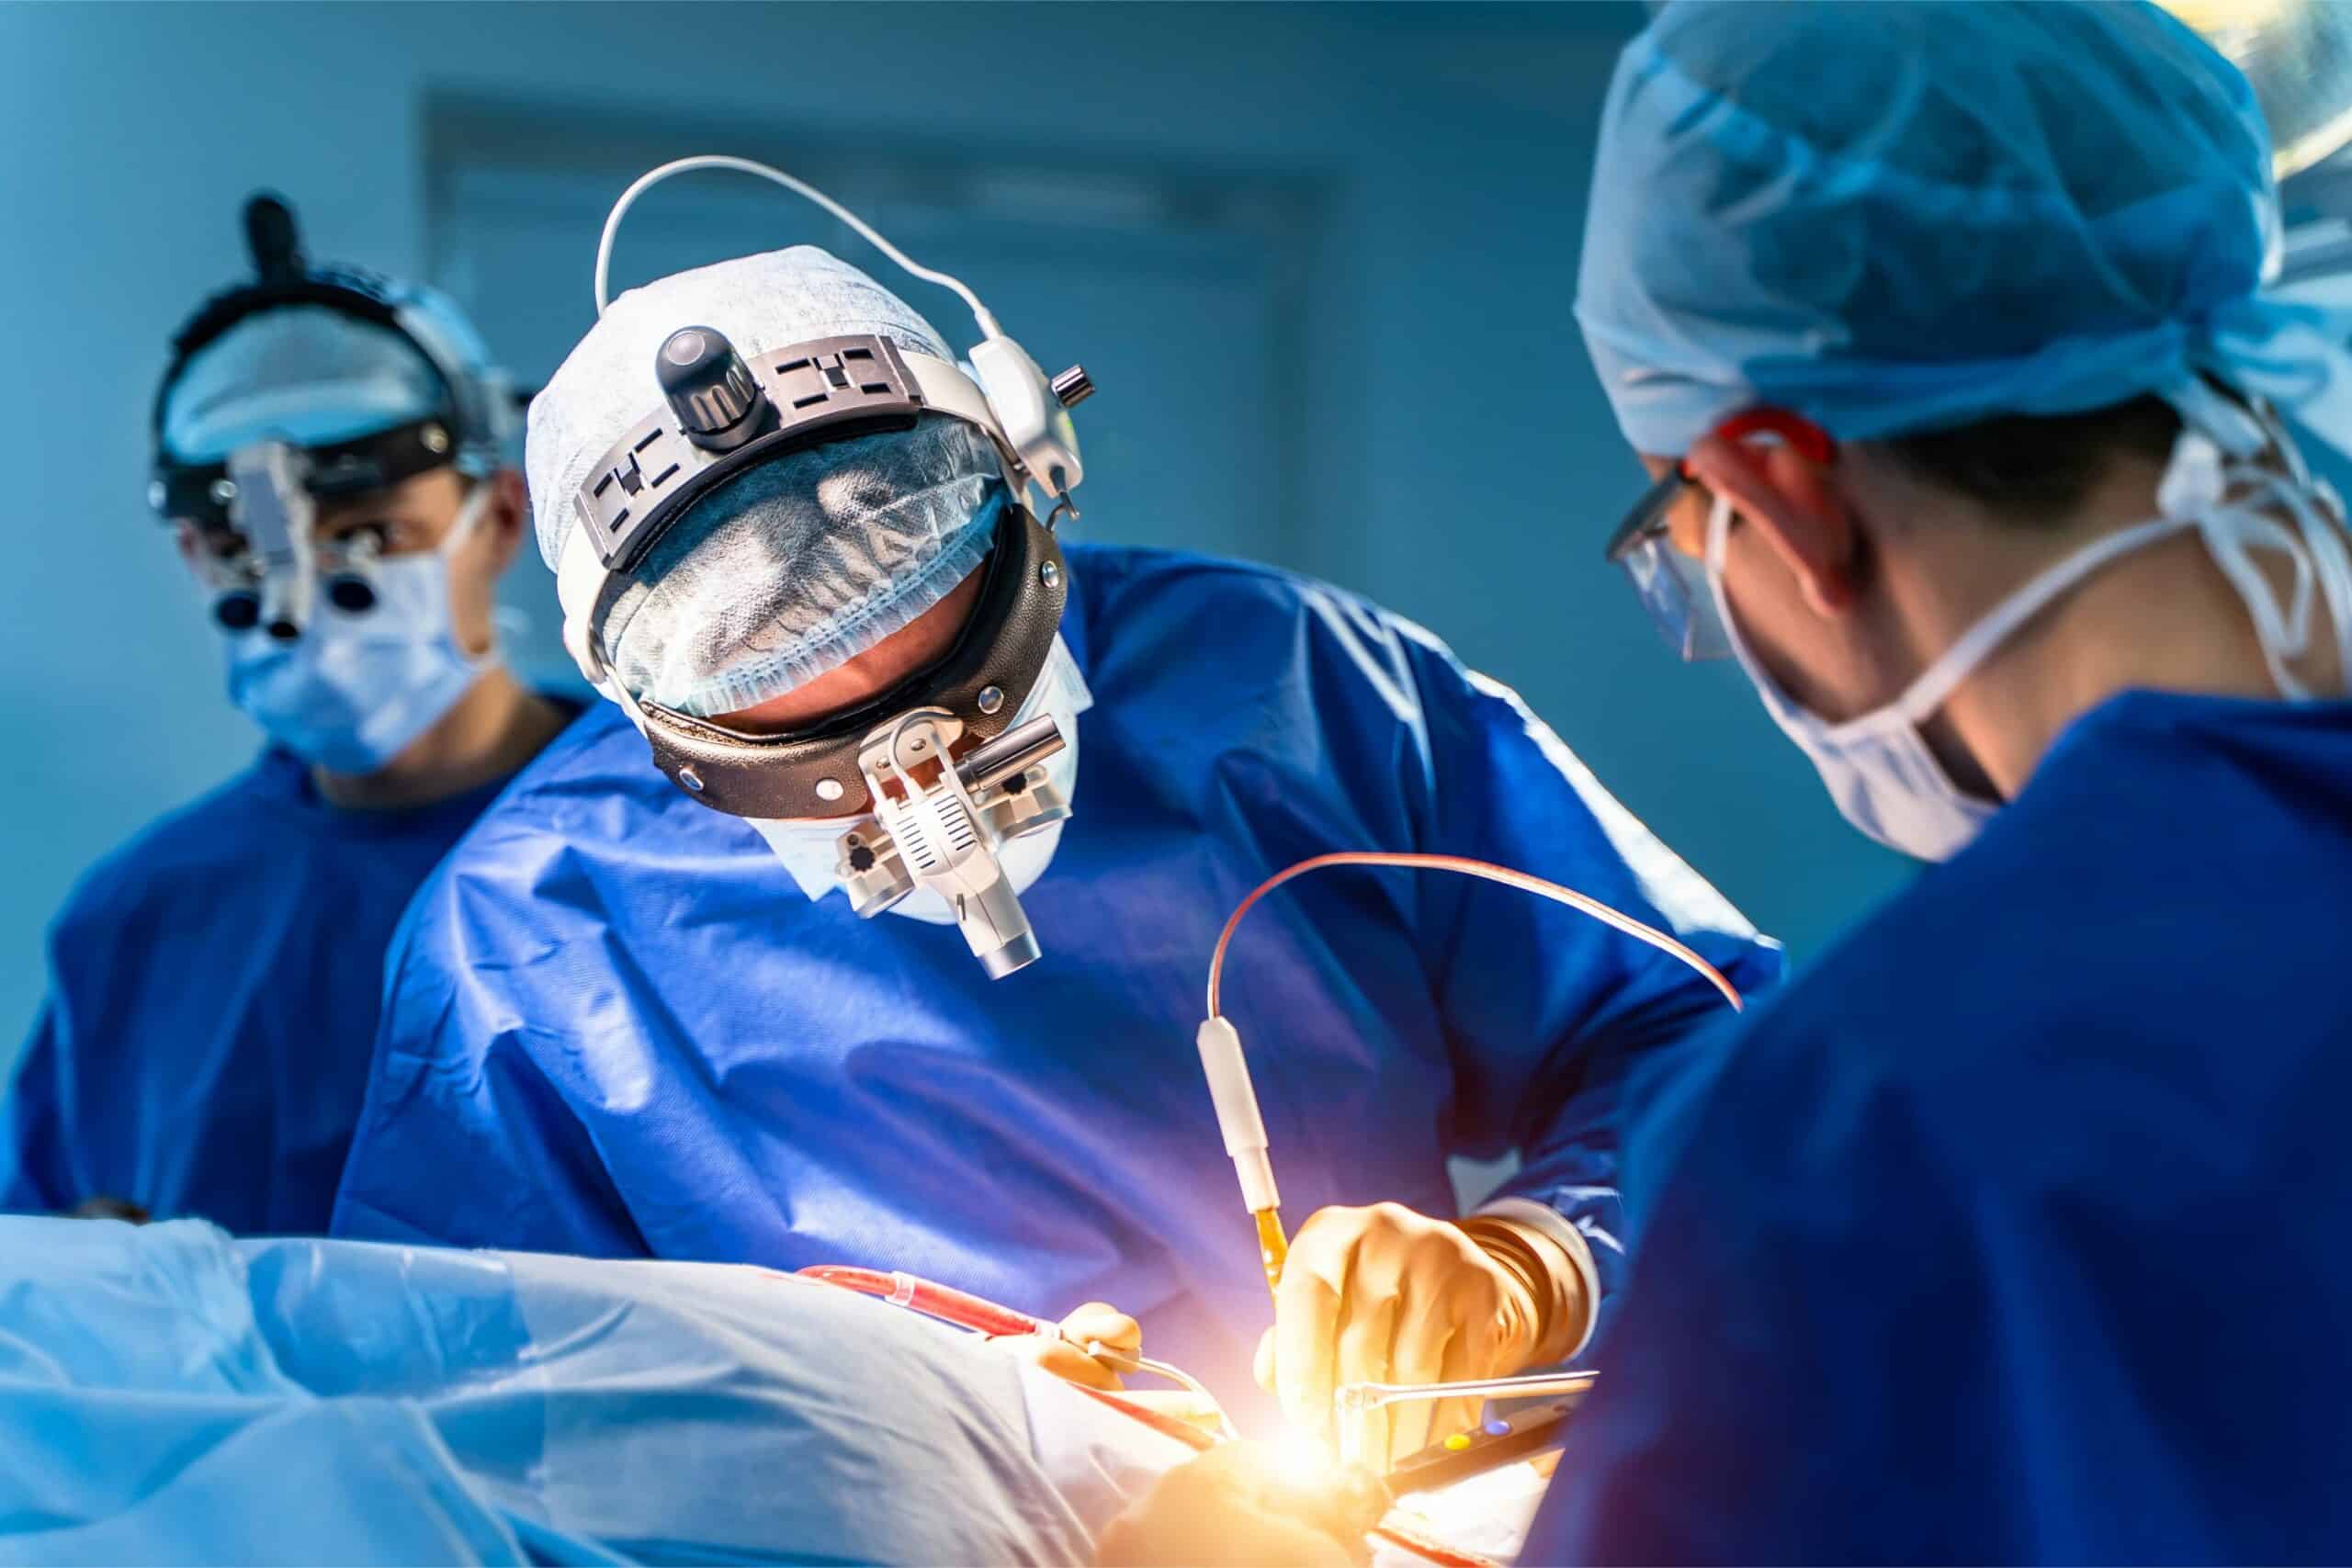 two doctors performing open heart surgery on a patient